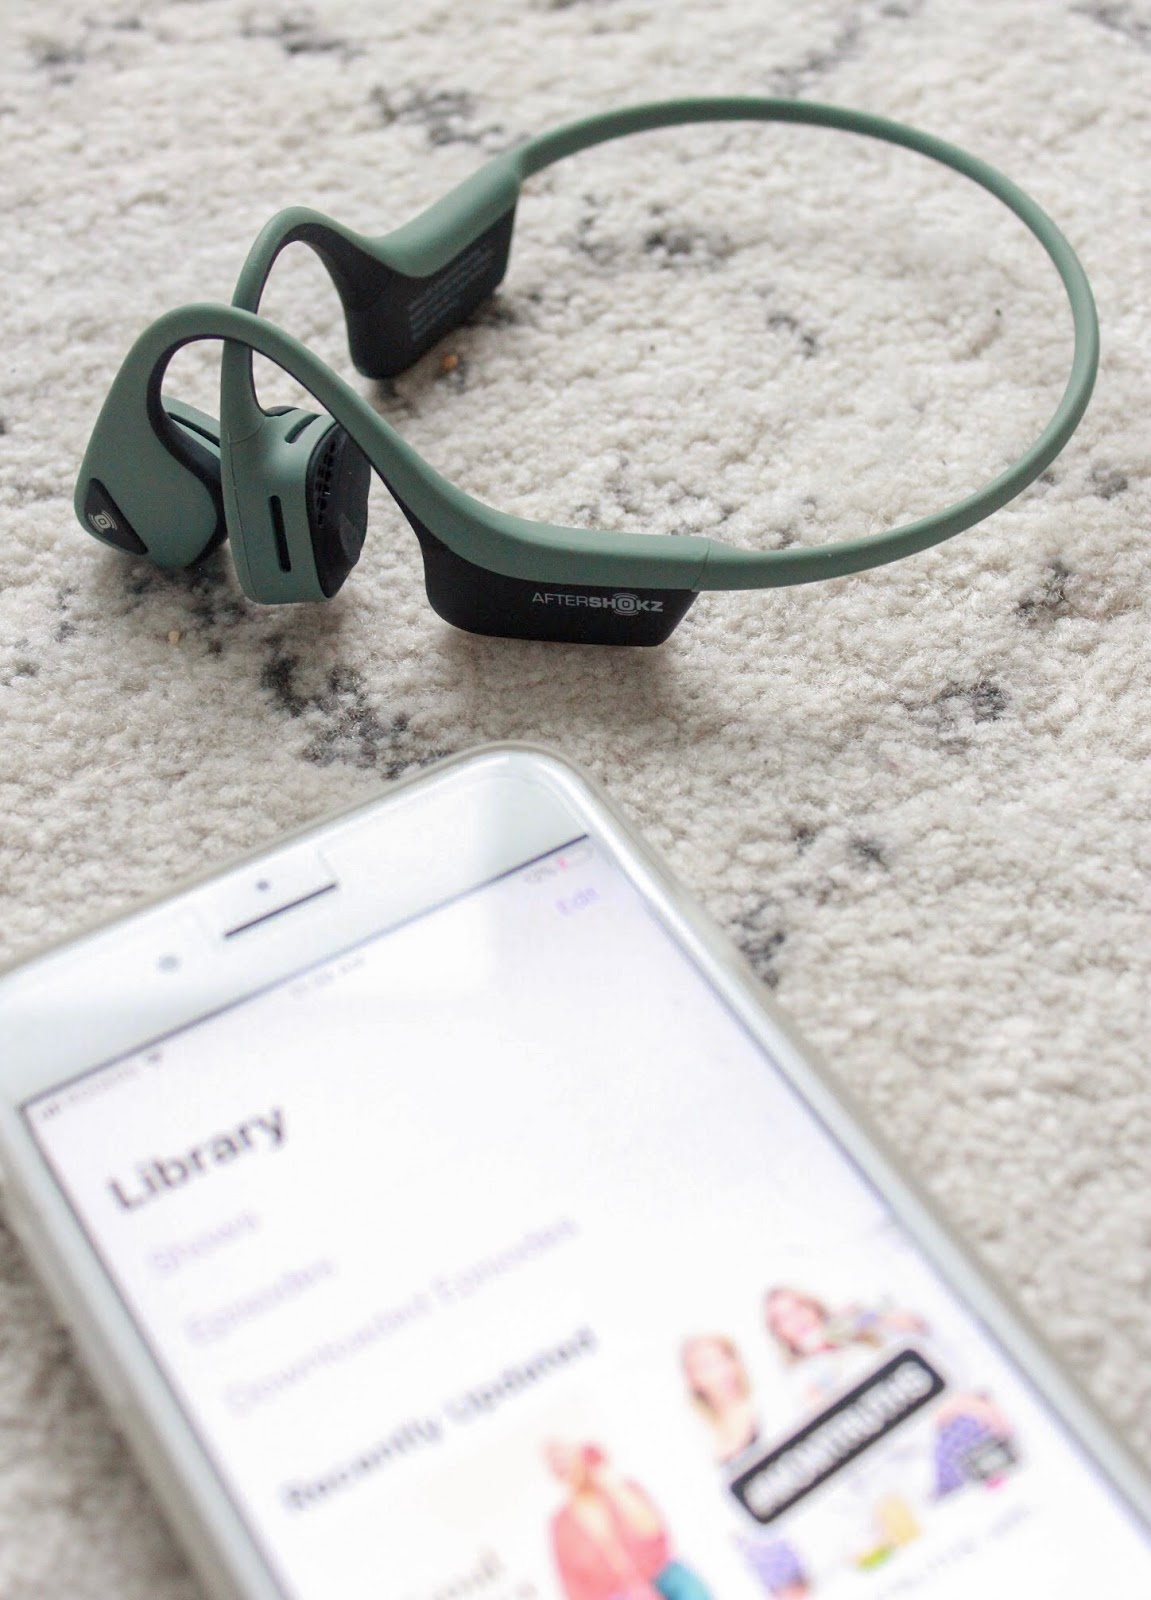 The Power of Podcasts - 5 Reasons Why You Should Listen to Podcasts